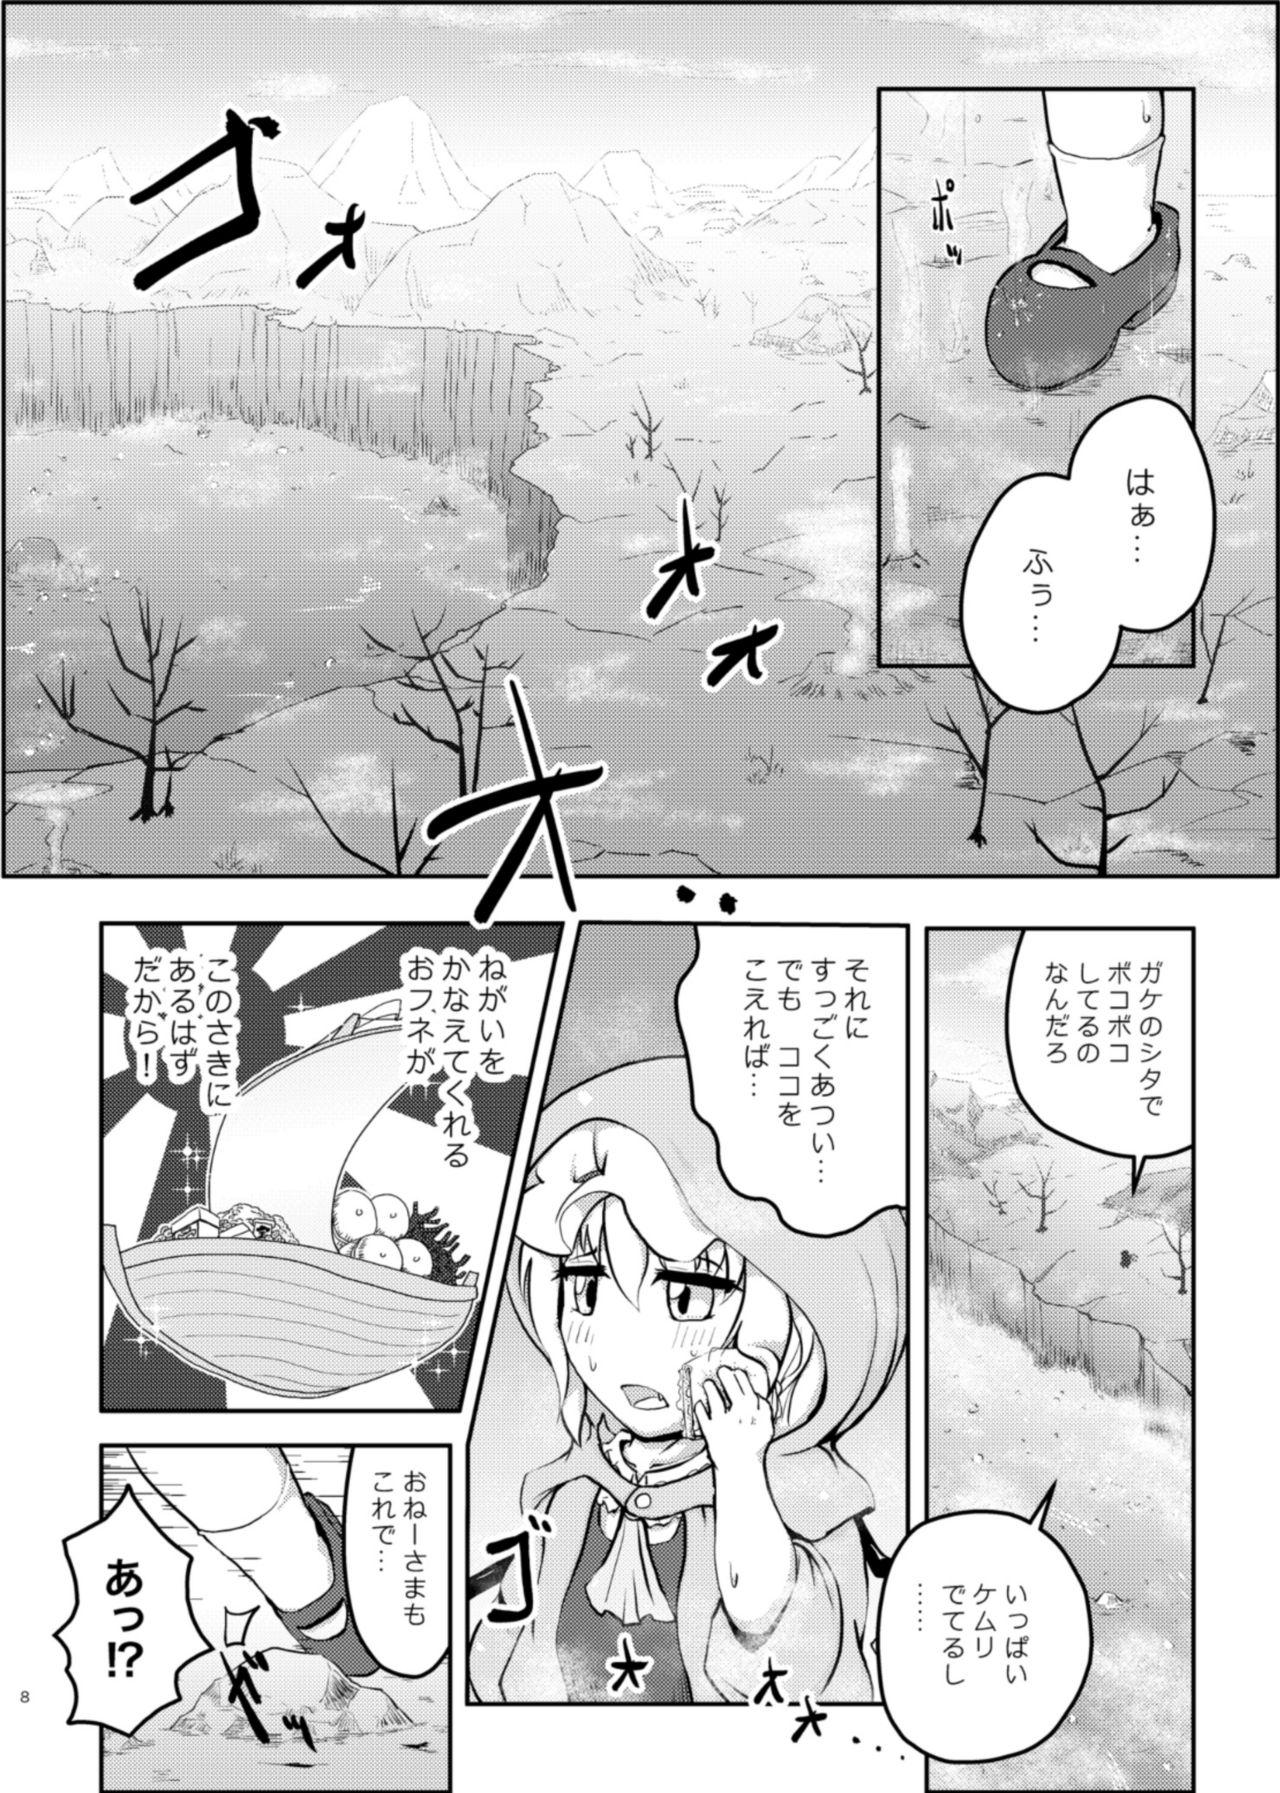 Sloppy Blowjob Scarlet Conflict 2 - Touhou project She - Page 8